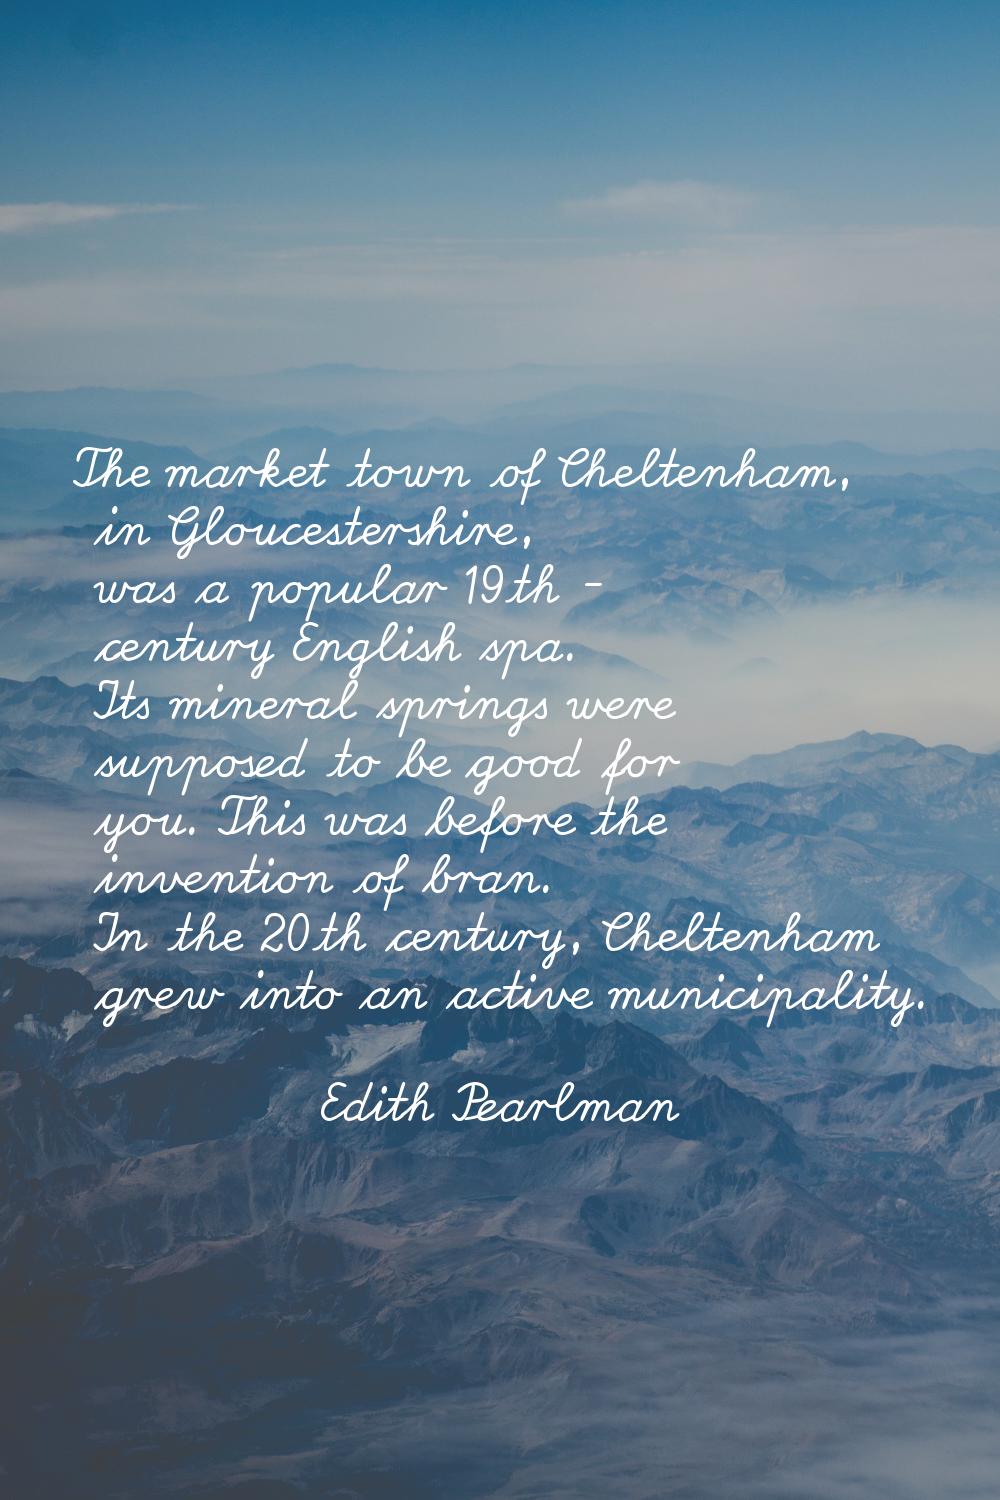 The market town of Cheltenham, in Gloucestershire, was a popular 19th - century English spa. Its mi